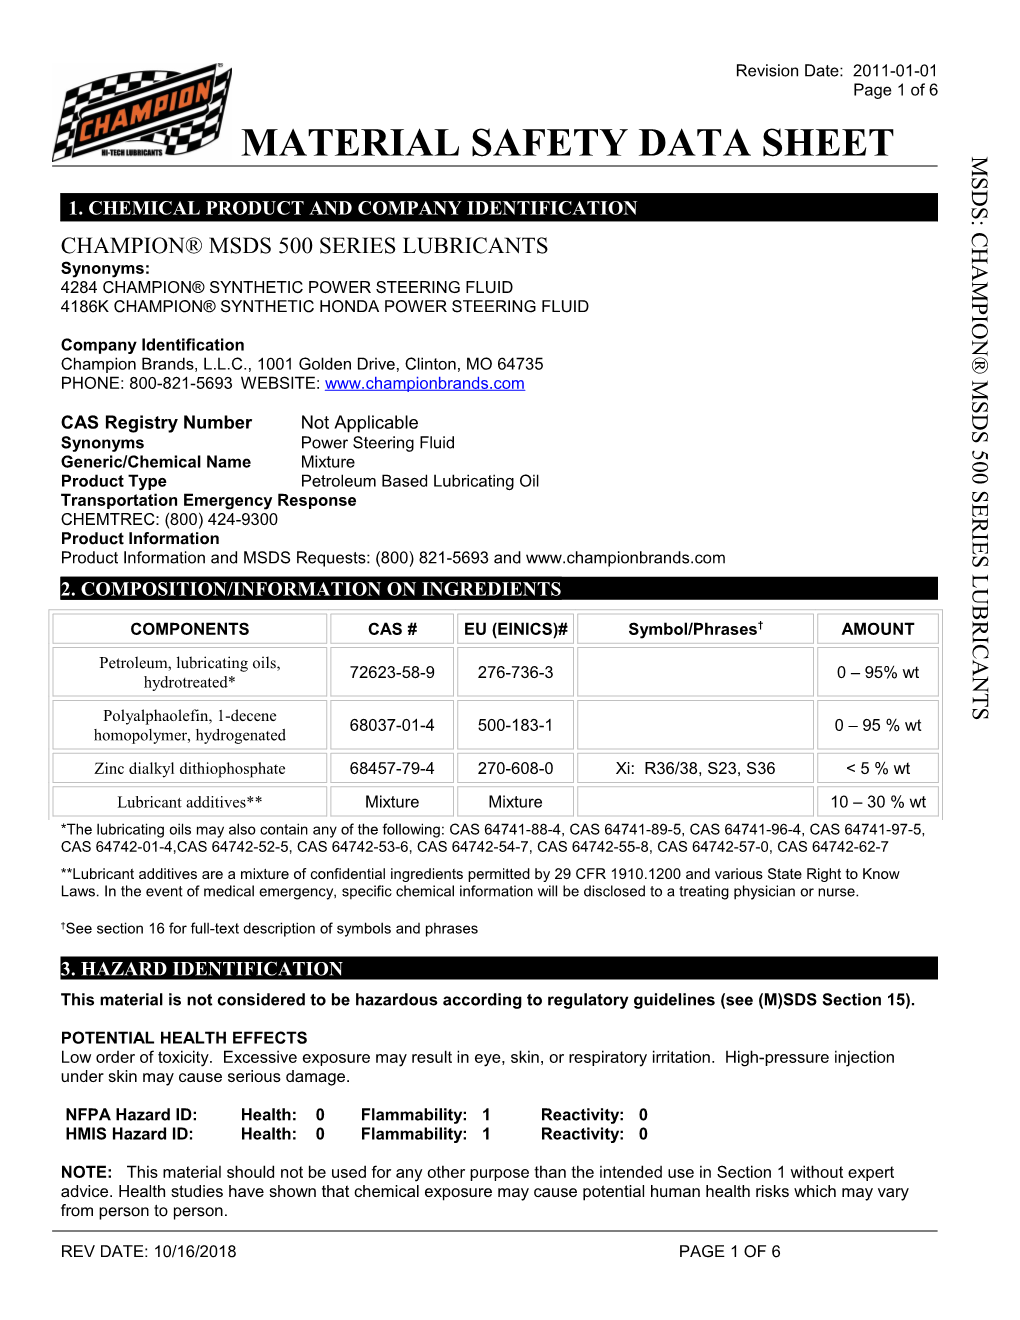 Champion Hi Tech Lubricants Material Safety Data Sheet